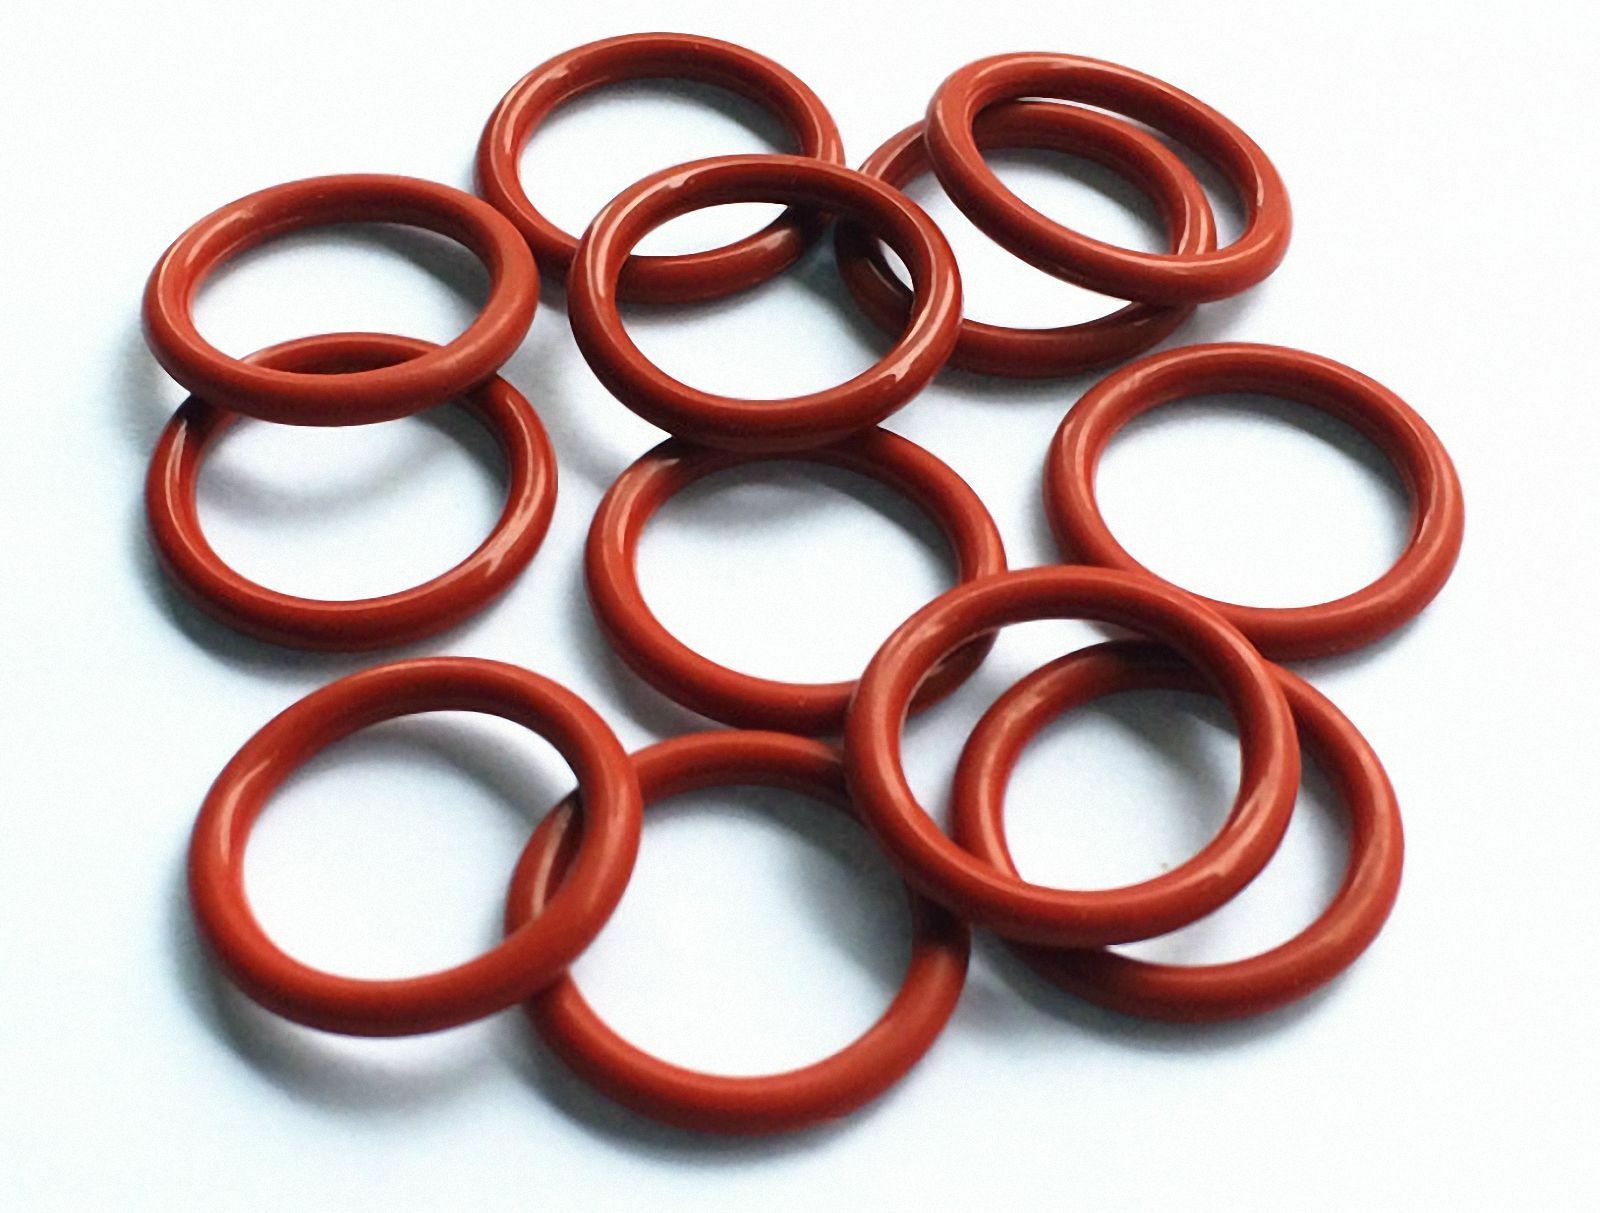 150Pcs 1mm 1.5mm 1.9mm Section OD from 5mm to 20mm Silicone O-Ring gaskets set